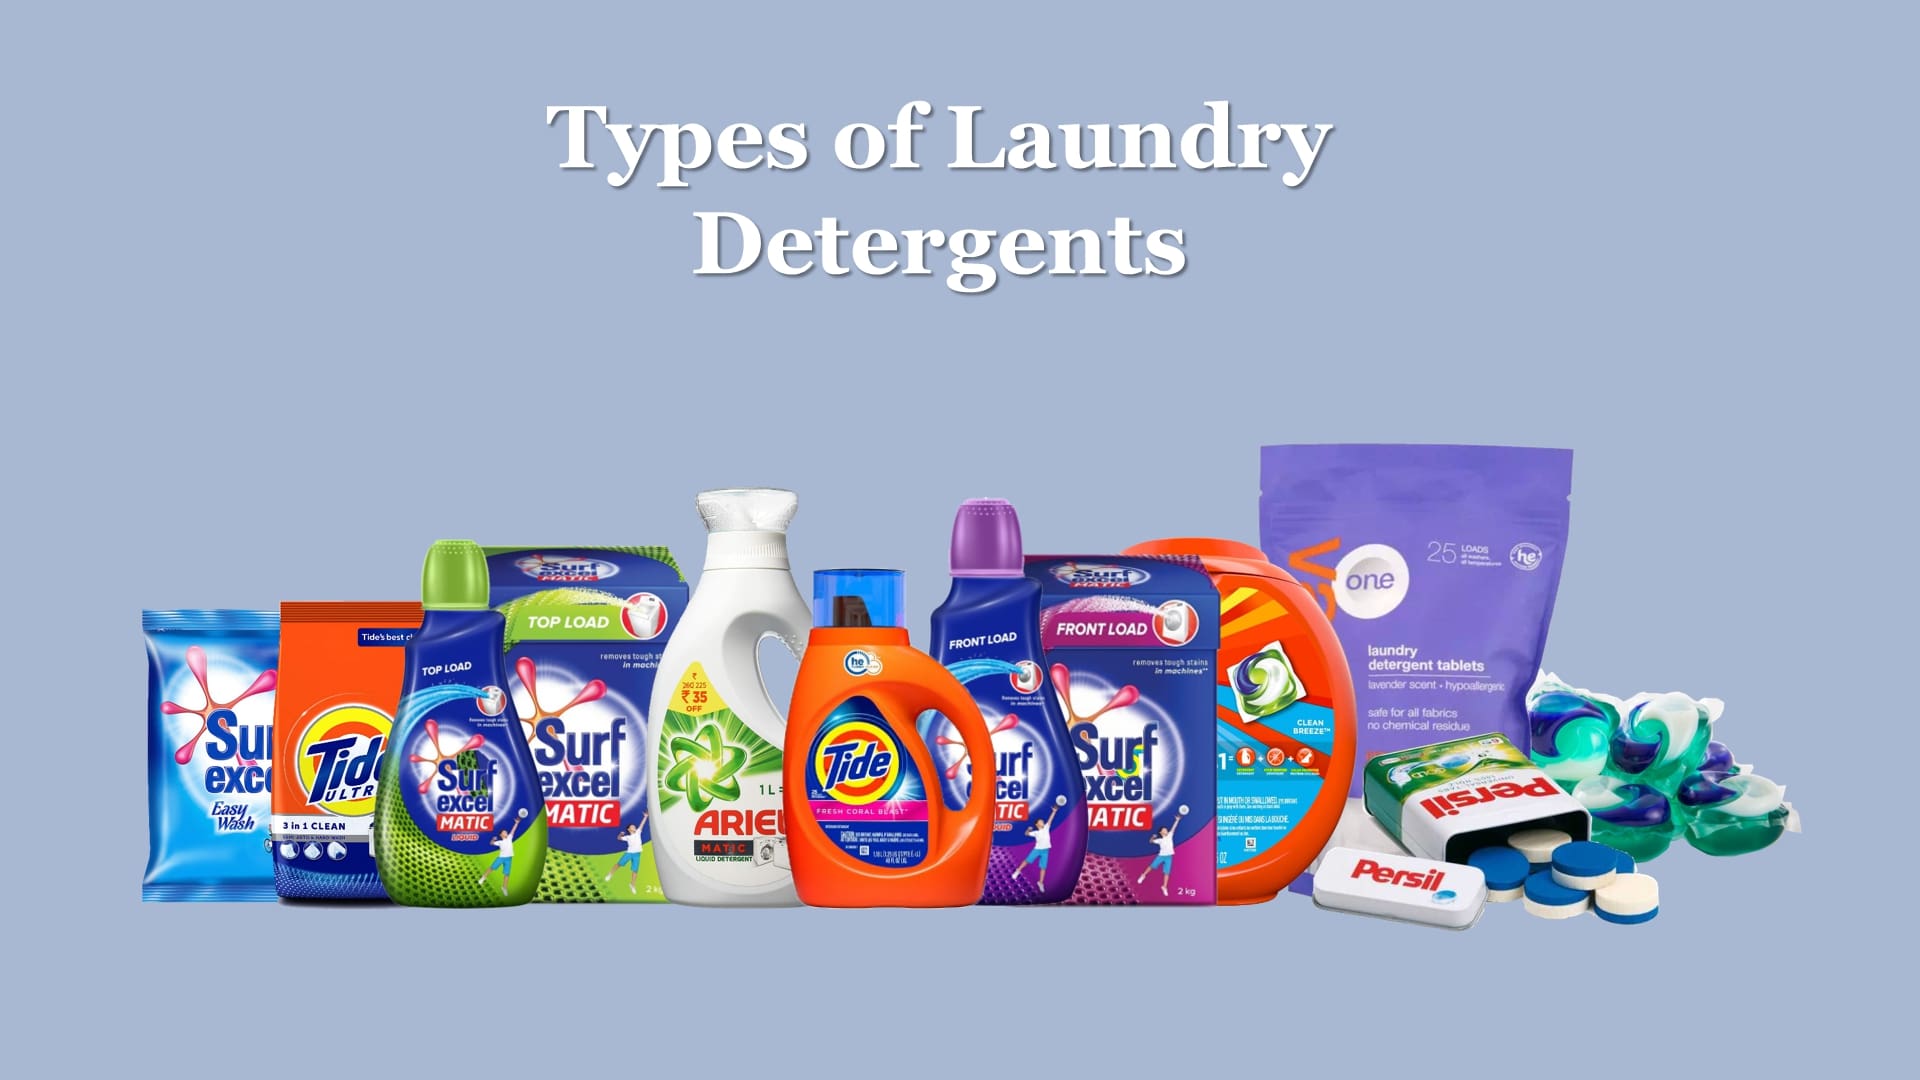 Types of Laundry Detergents